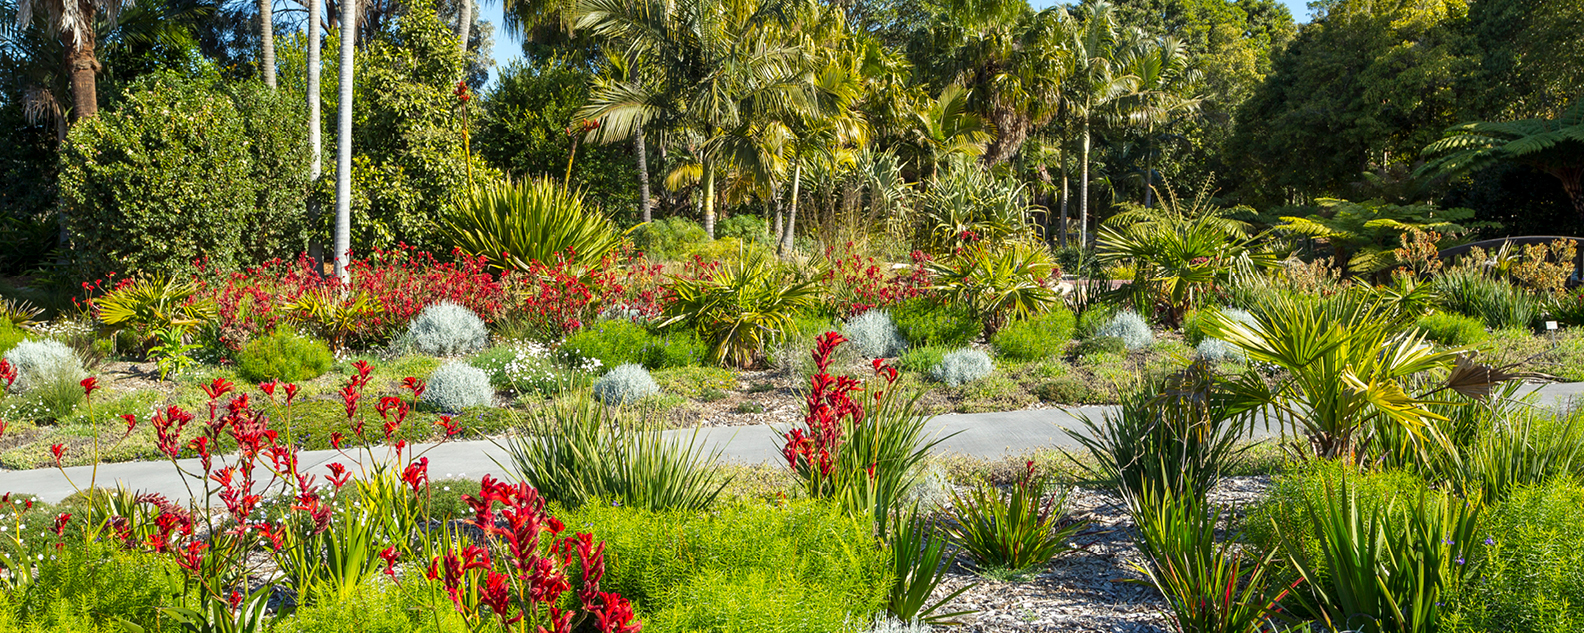 Lush tropical garden with palms, red kangaroo paws in bloom